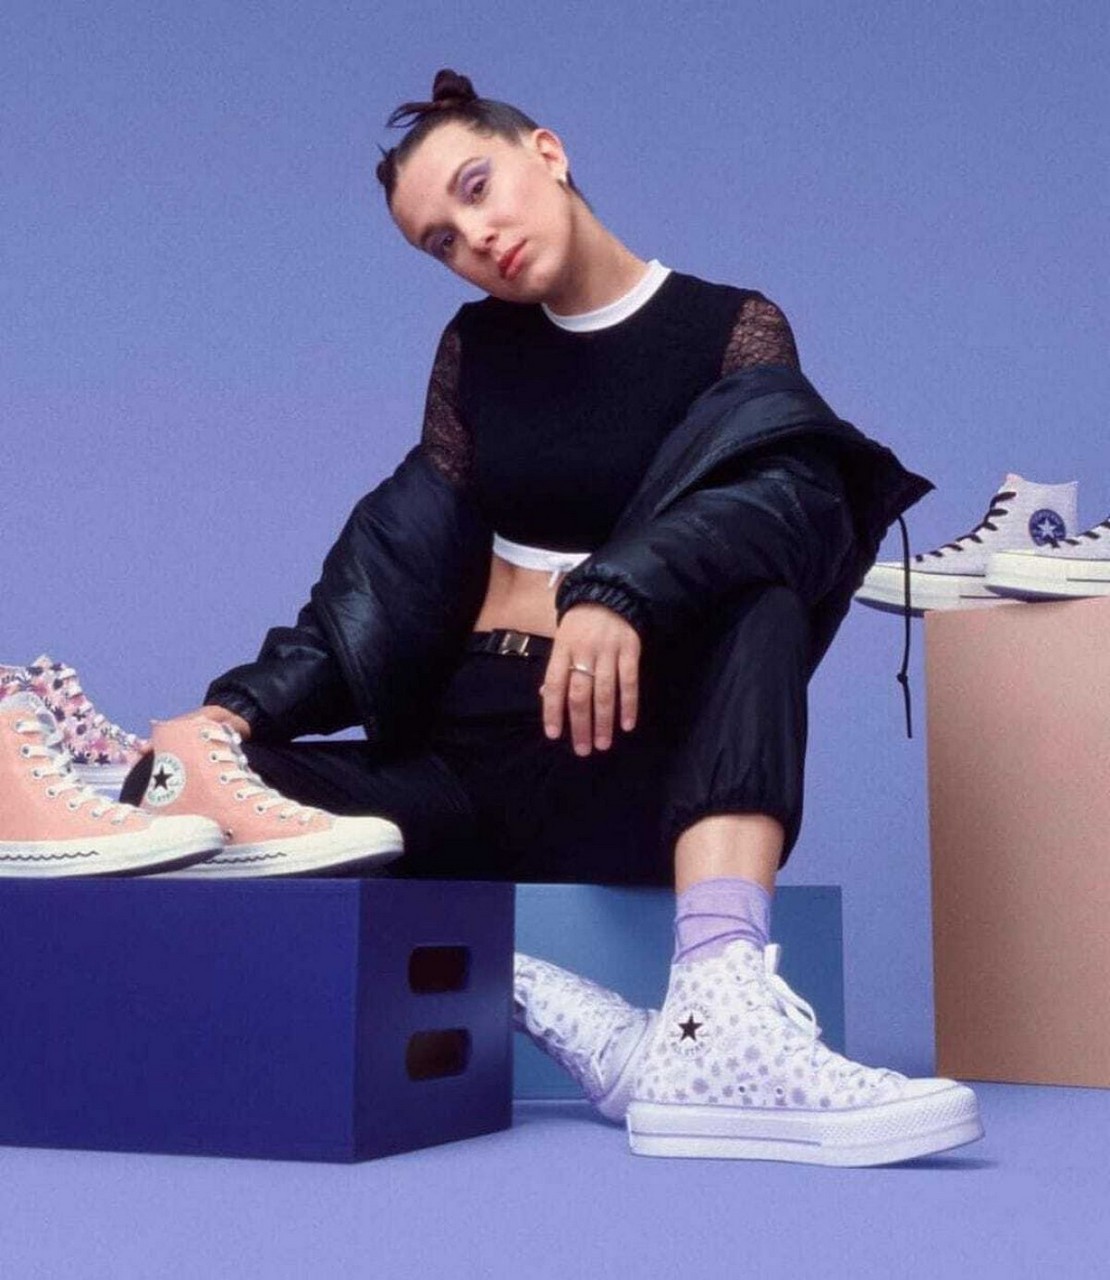 Millie Bobby Brown For Converse November